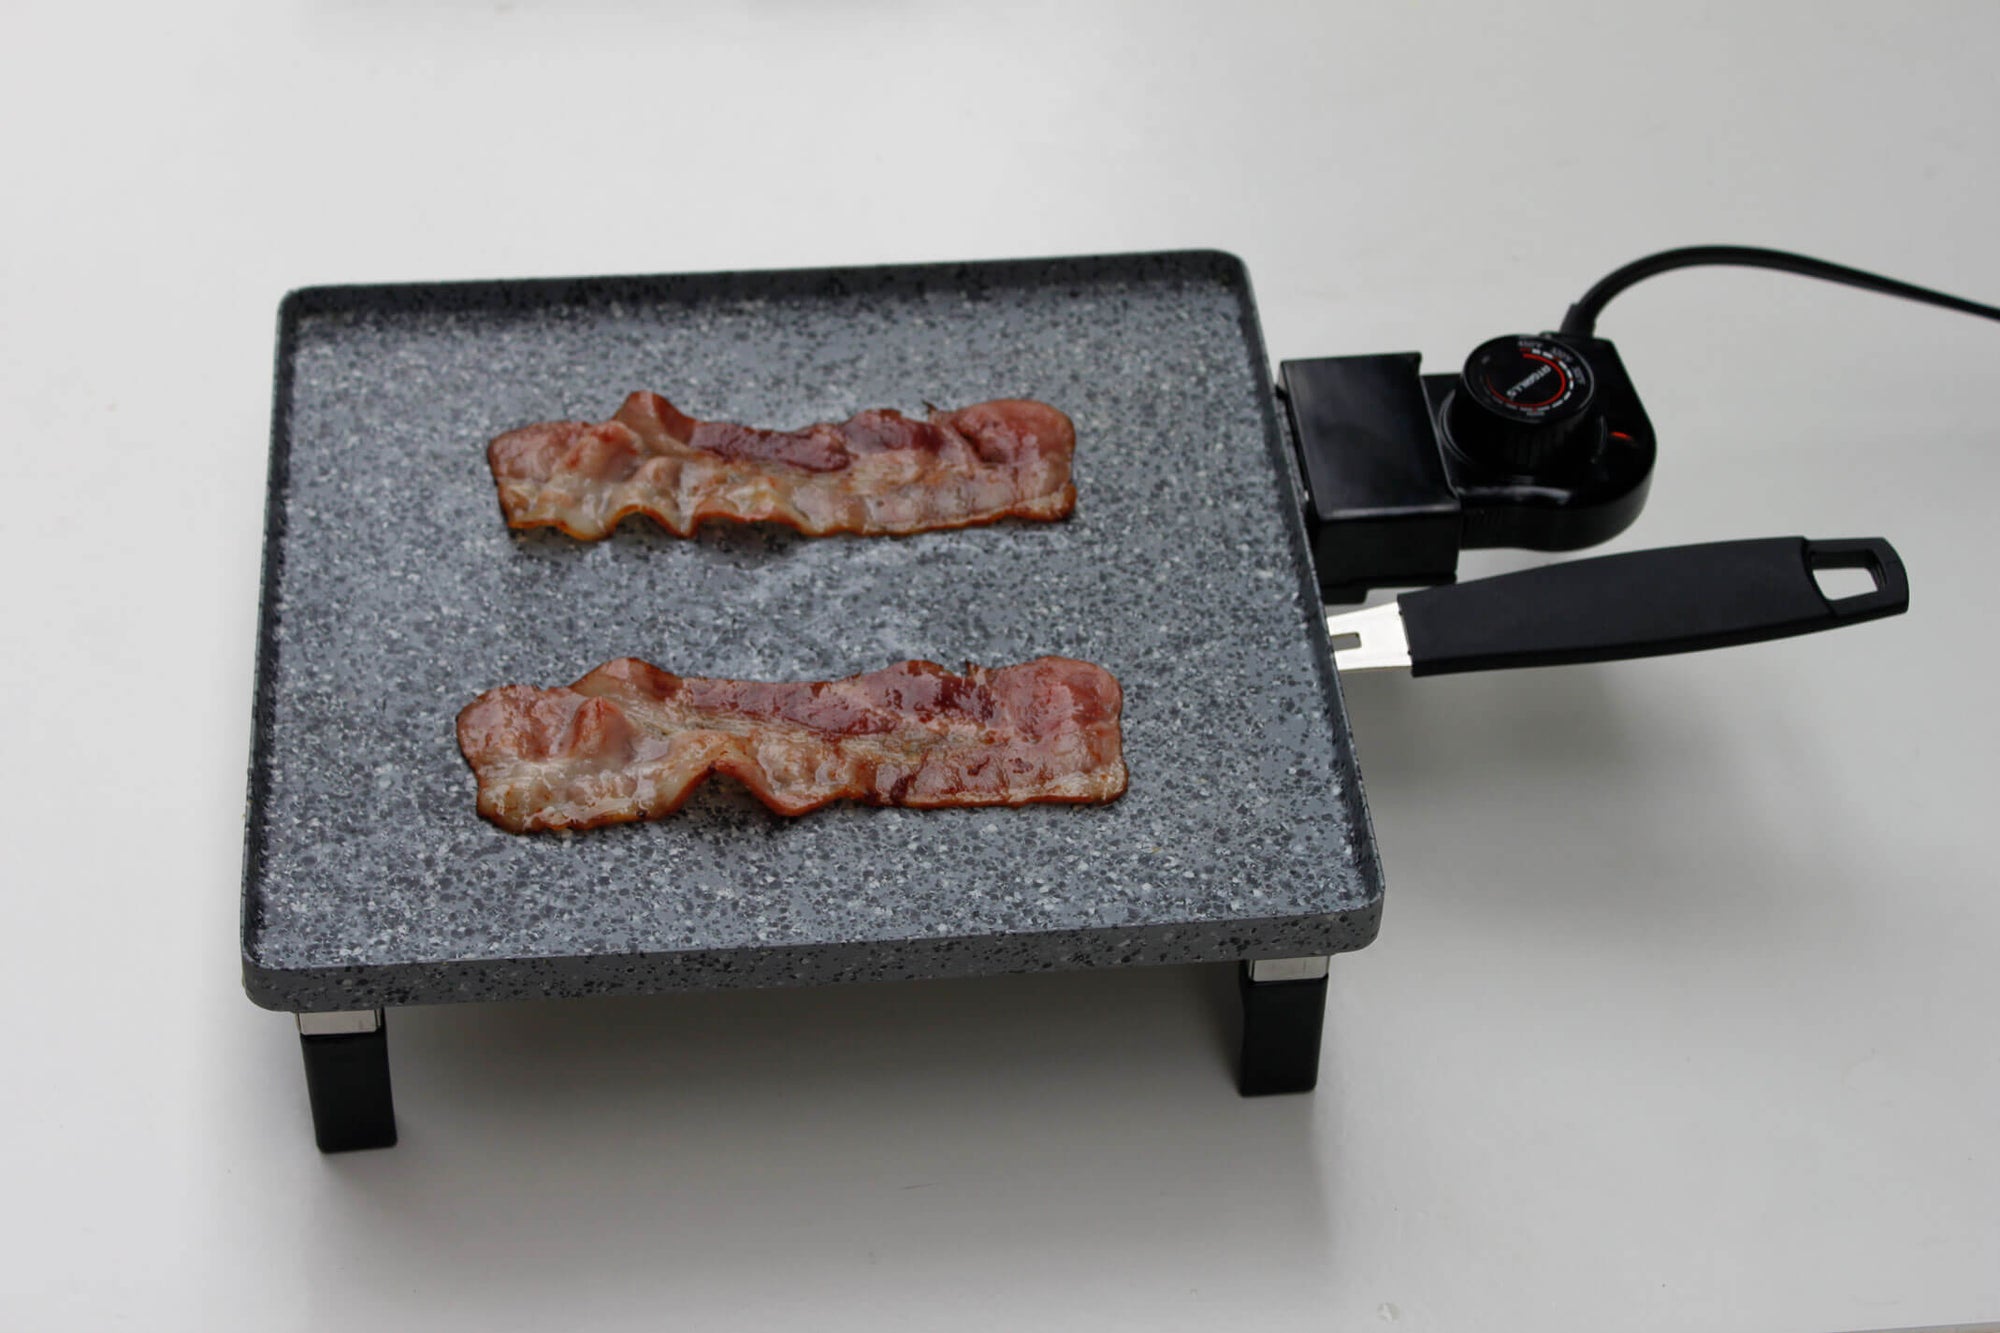 Bacon on indoor electric griddle pan